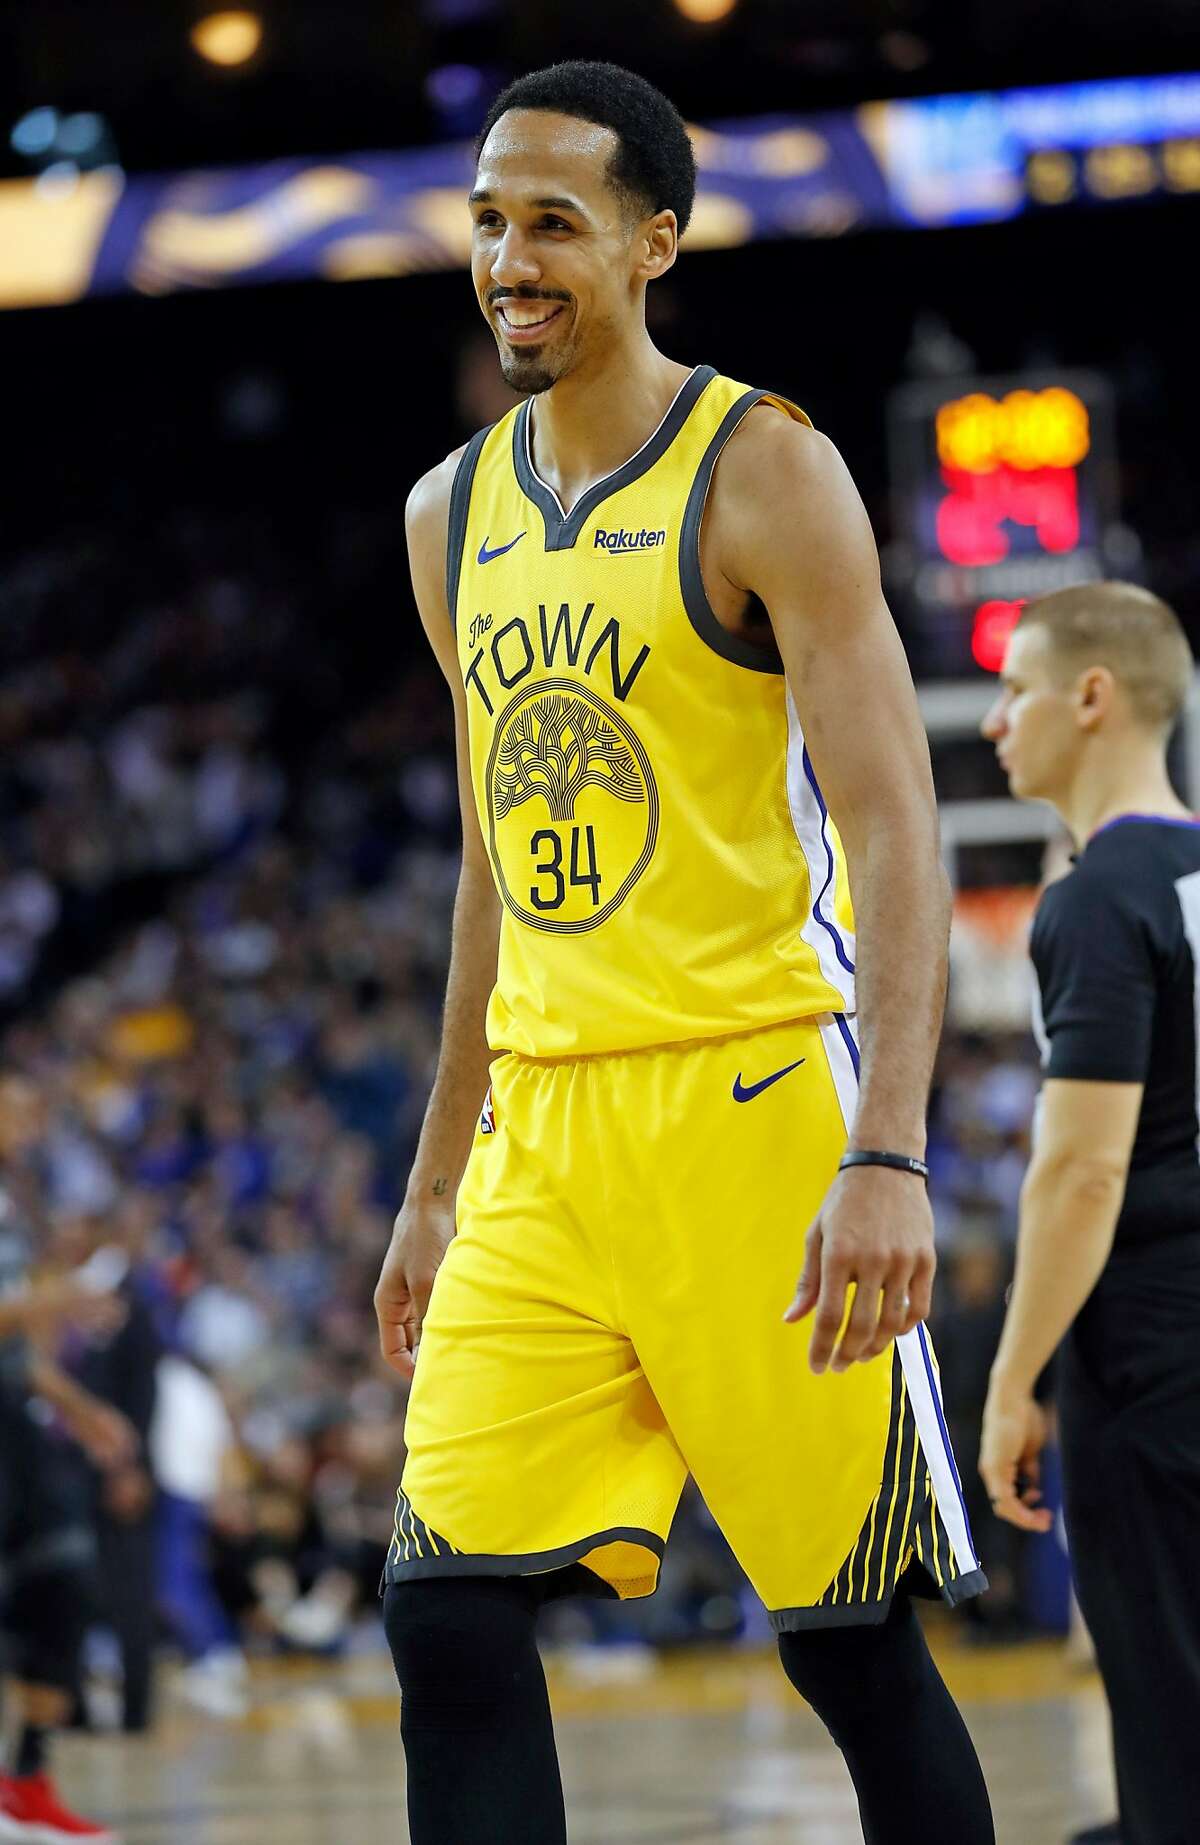 Golden State Warriors' Shaun Livingston smiles in 4th quarter of 121-114 win over Detroit Pistons during NBA game at Oracle Arena in Oakland, Calif., on Sunday, March 24, 2019.